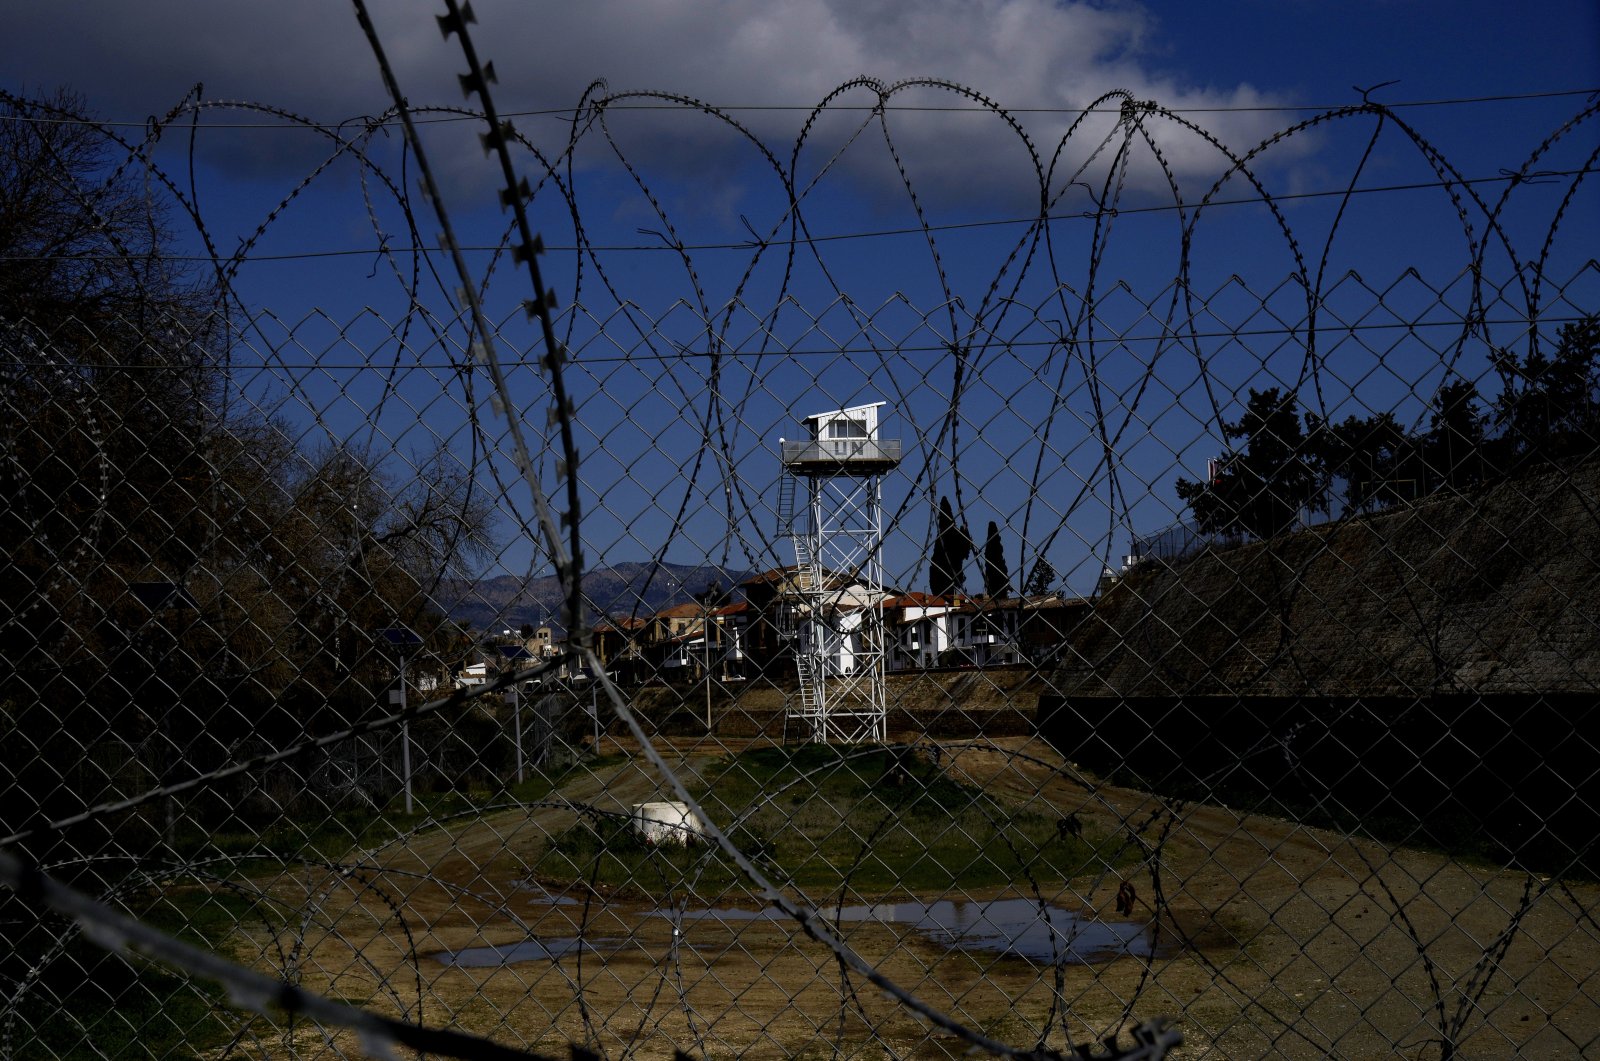 A U.N. tower guard post is seen behind barbed wires inside the U.N.-controlled buffer zone between the Greek Cypriot administration and the Turkish Republic of Northern Cyprus in the divided capital Nicosia, Cyprus, Thursday, Feb. 10, 2022. (AP File Photo)